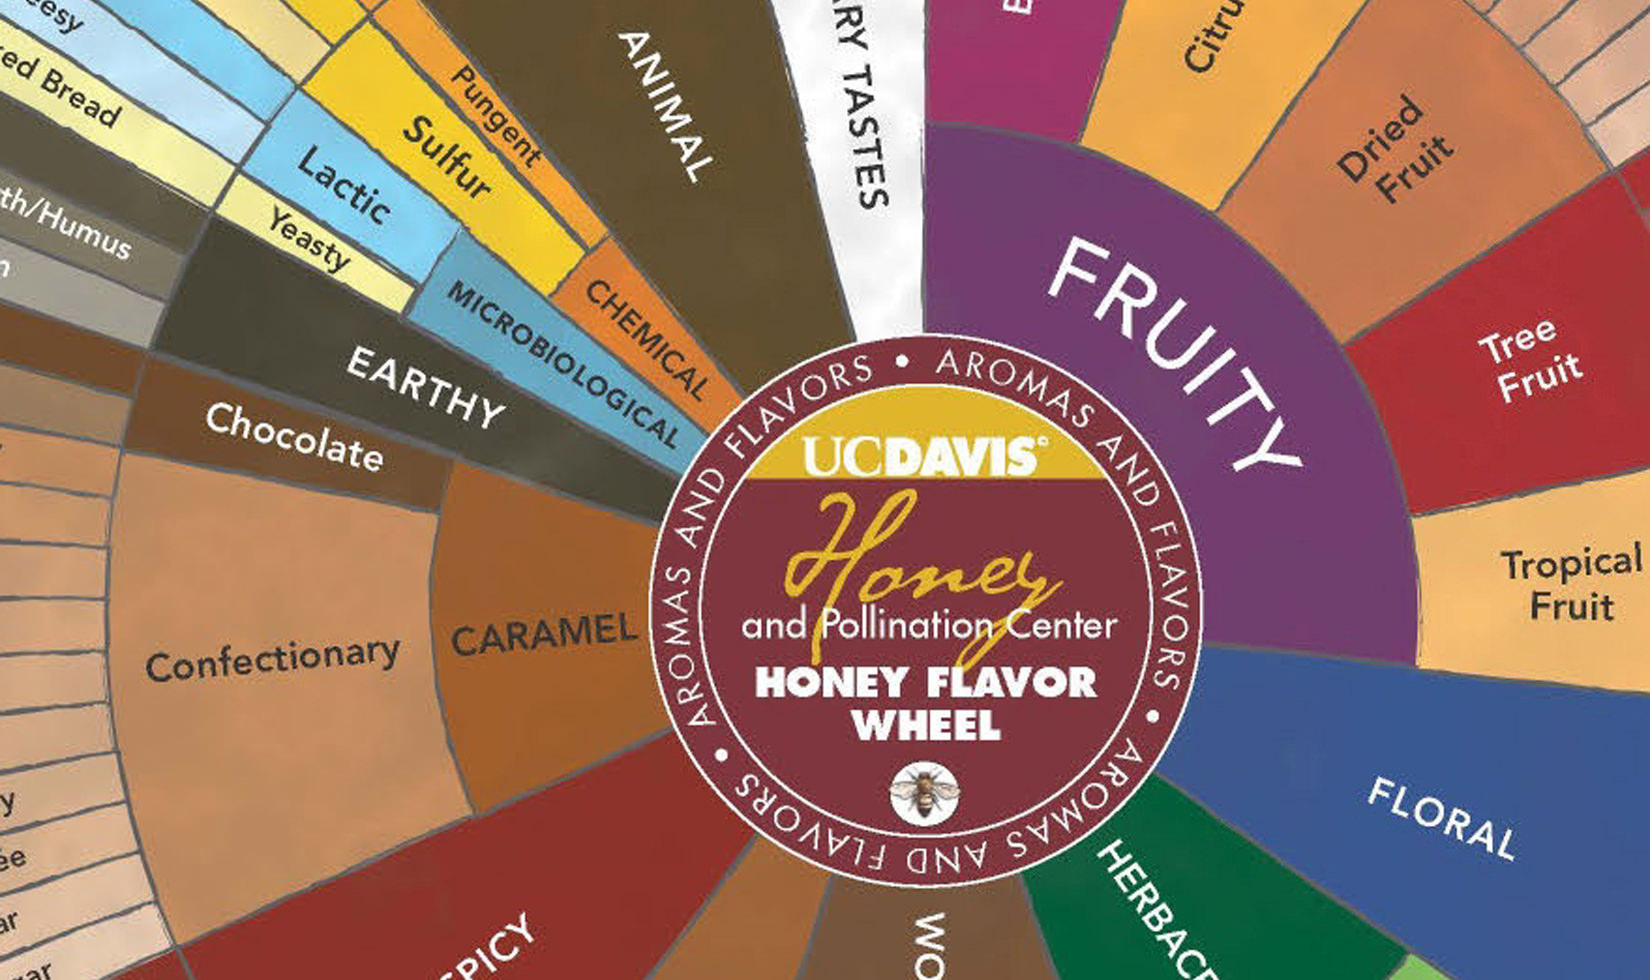 Hone Flavor Wheel Chart as featured in Wine Country Table